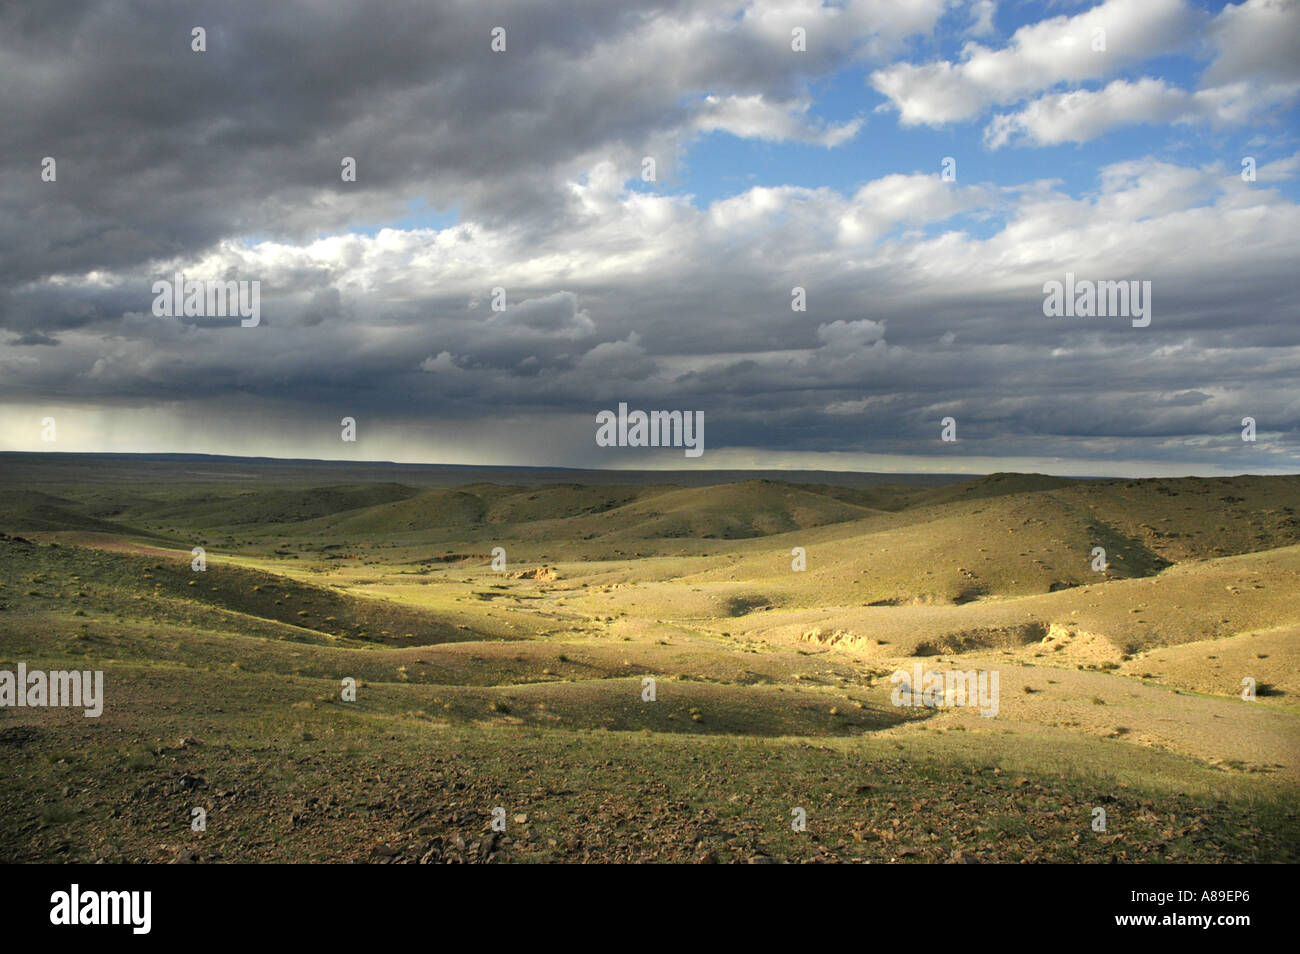 Wide steppe landscape with shades of the clouds near Ongiyn monastery Mongolia Stock Photo